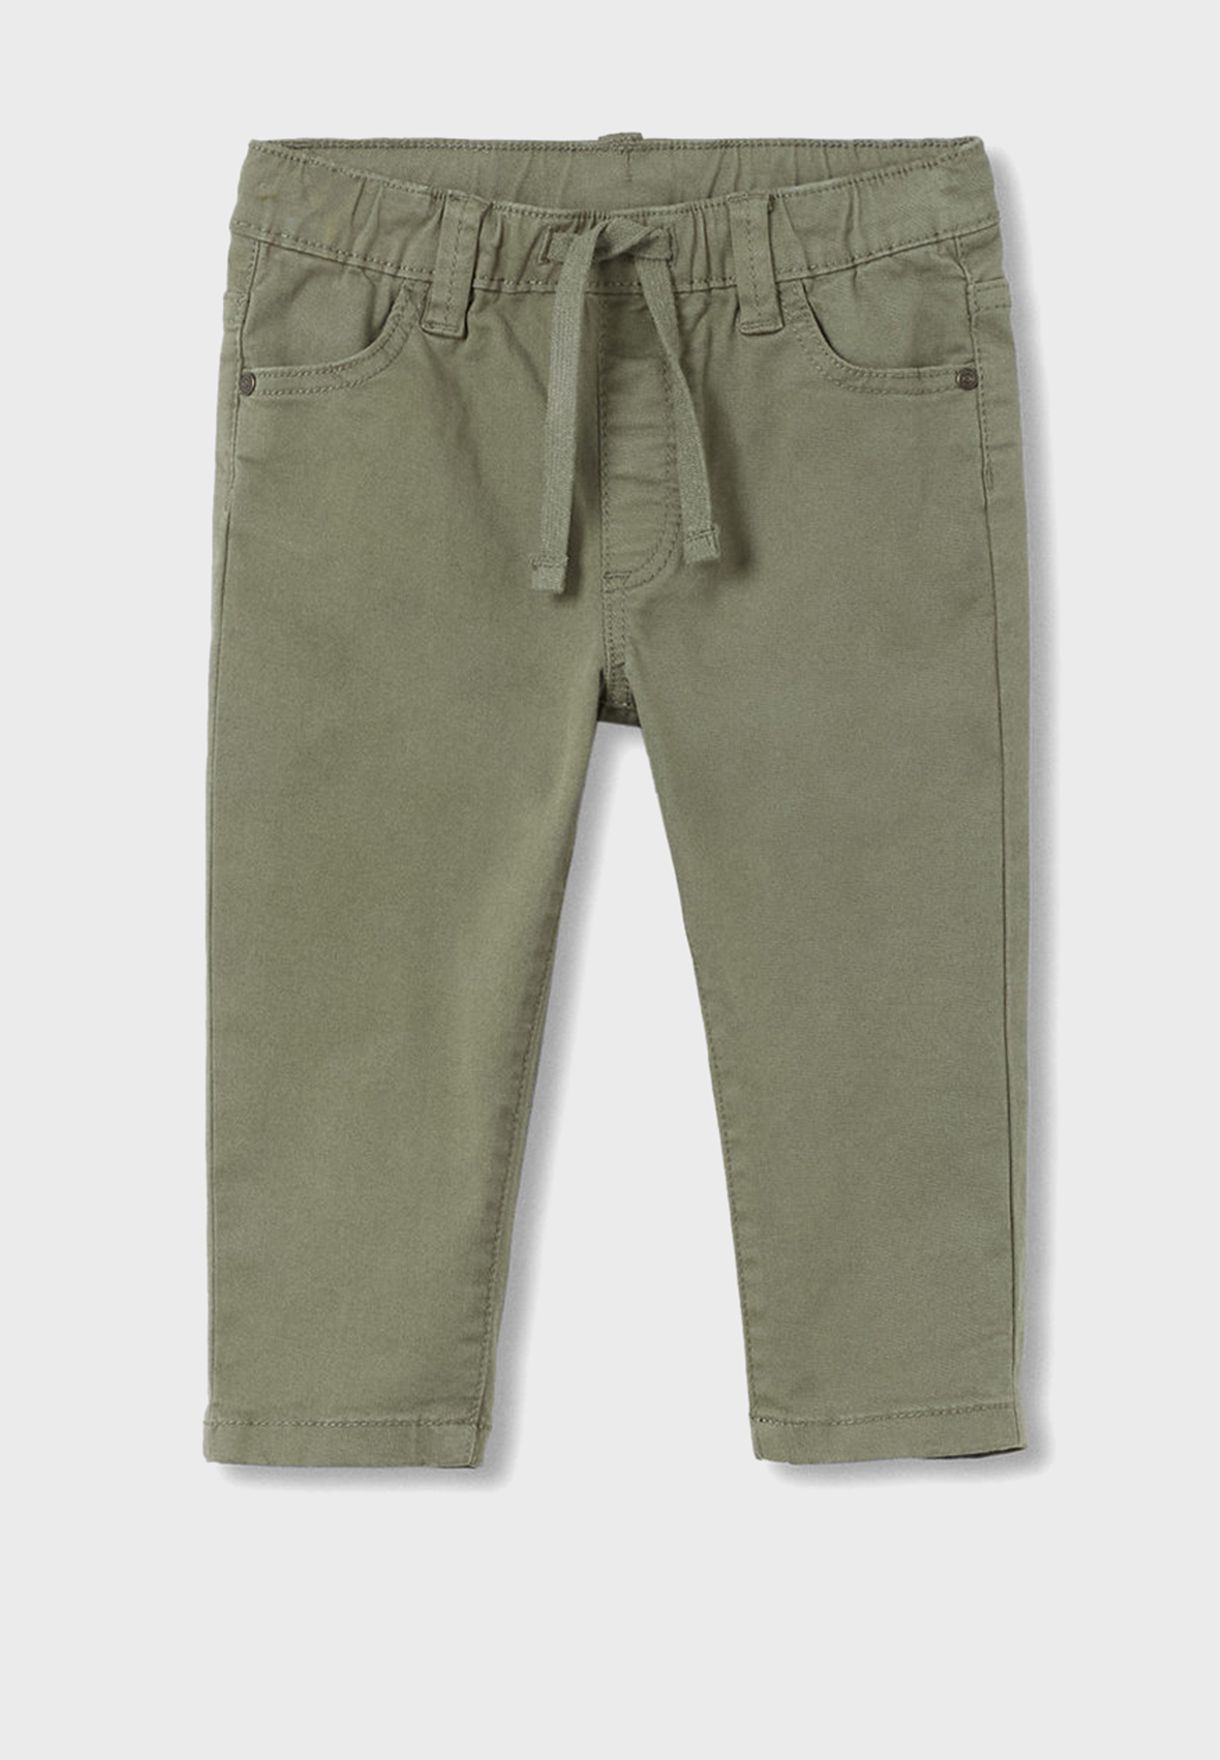 Infant Drawstring Trousers